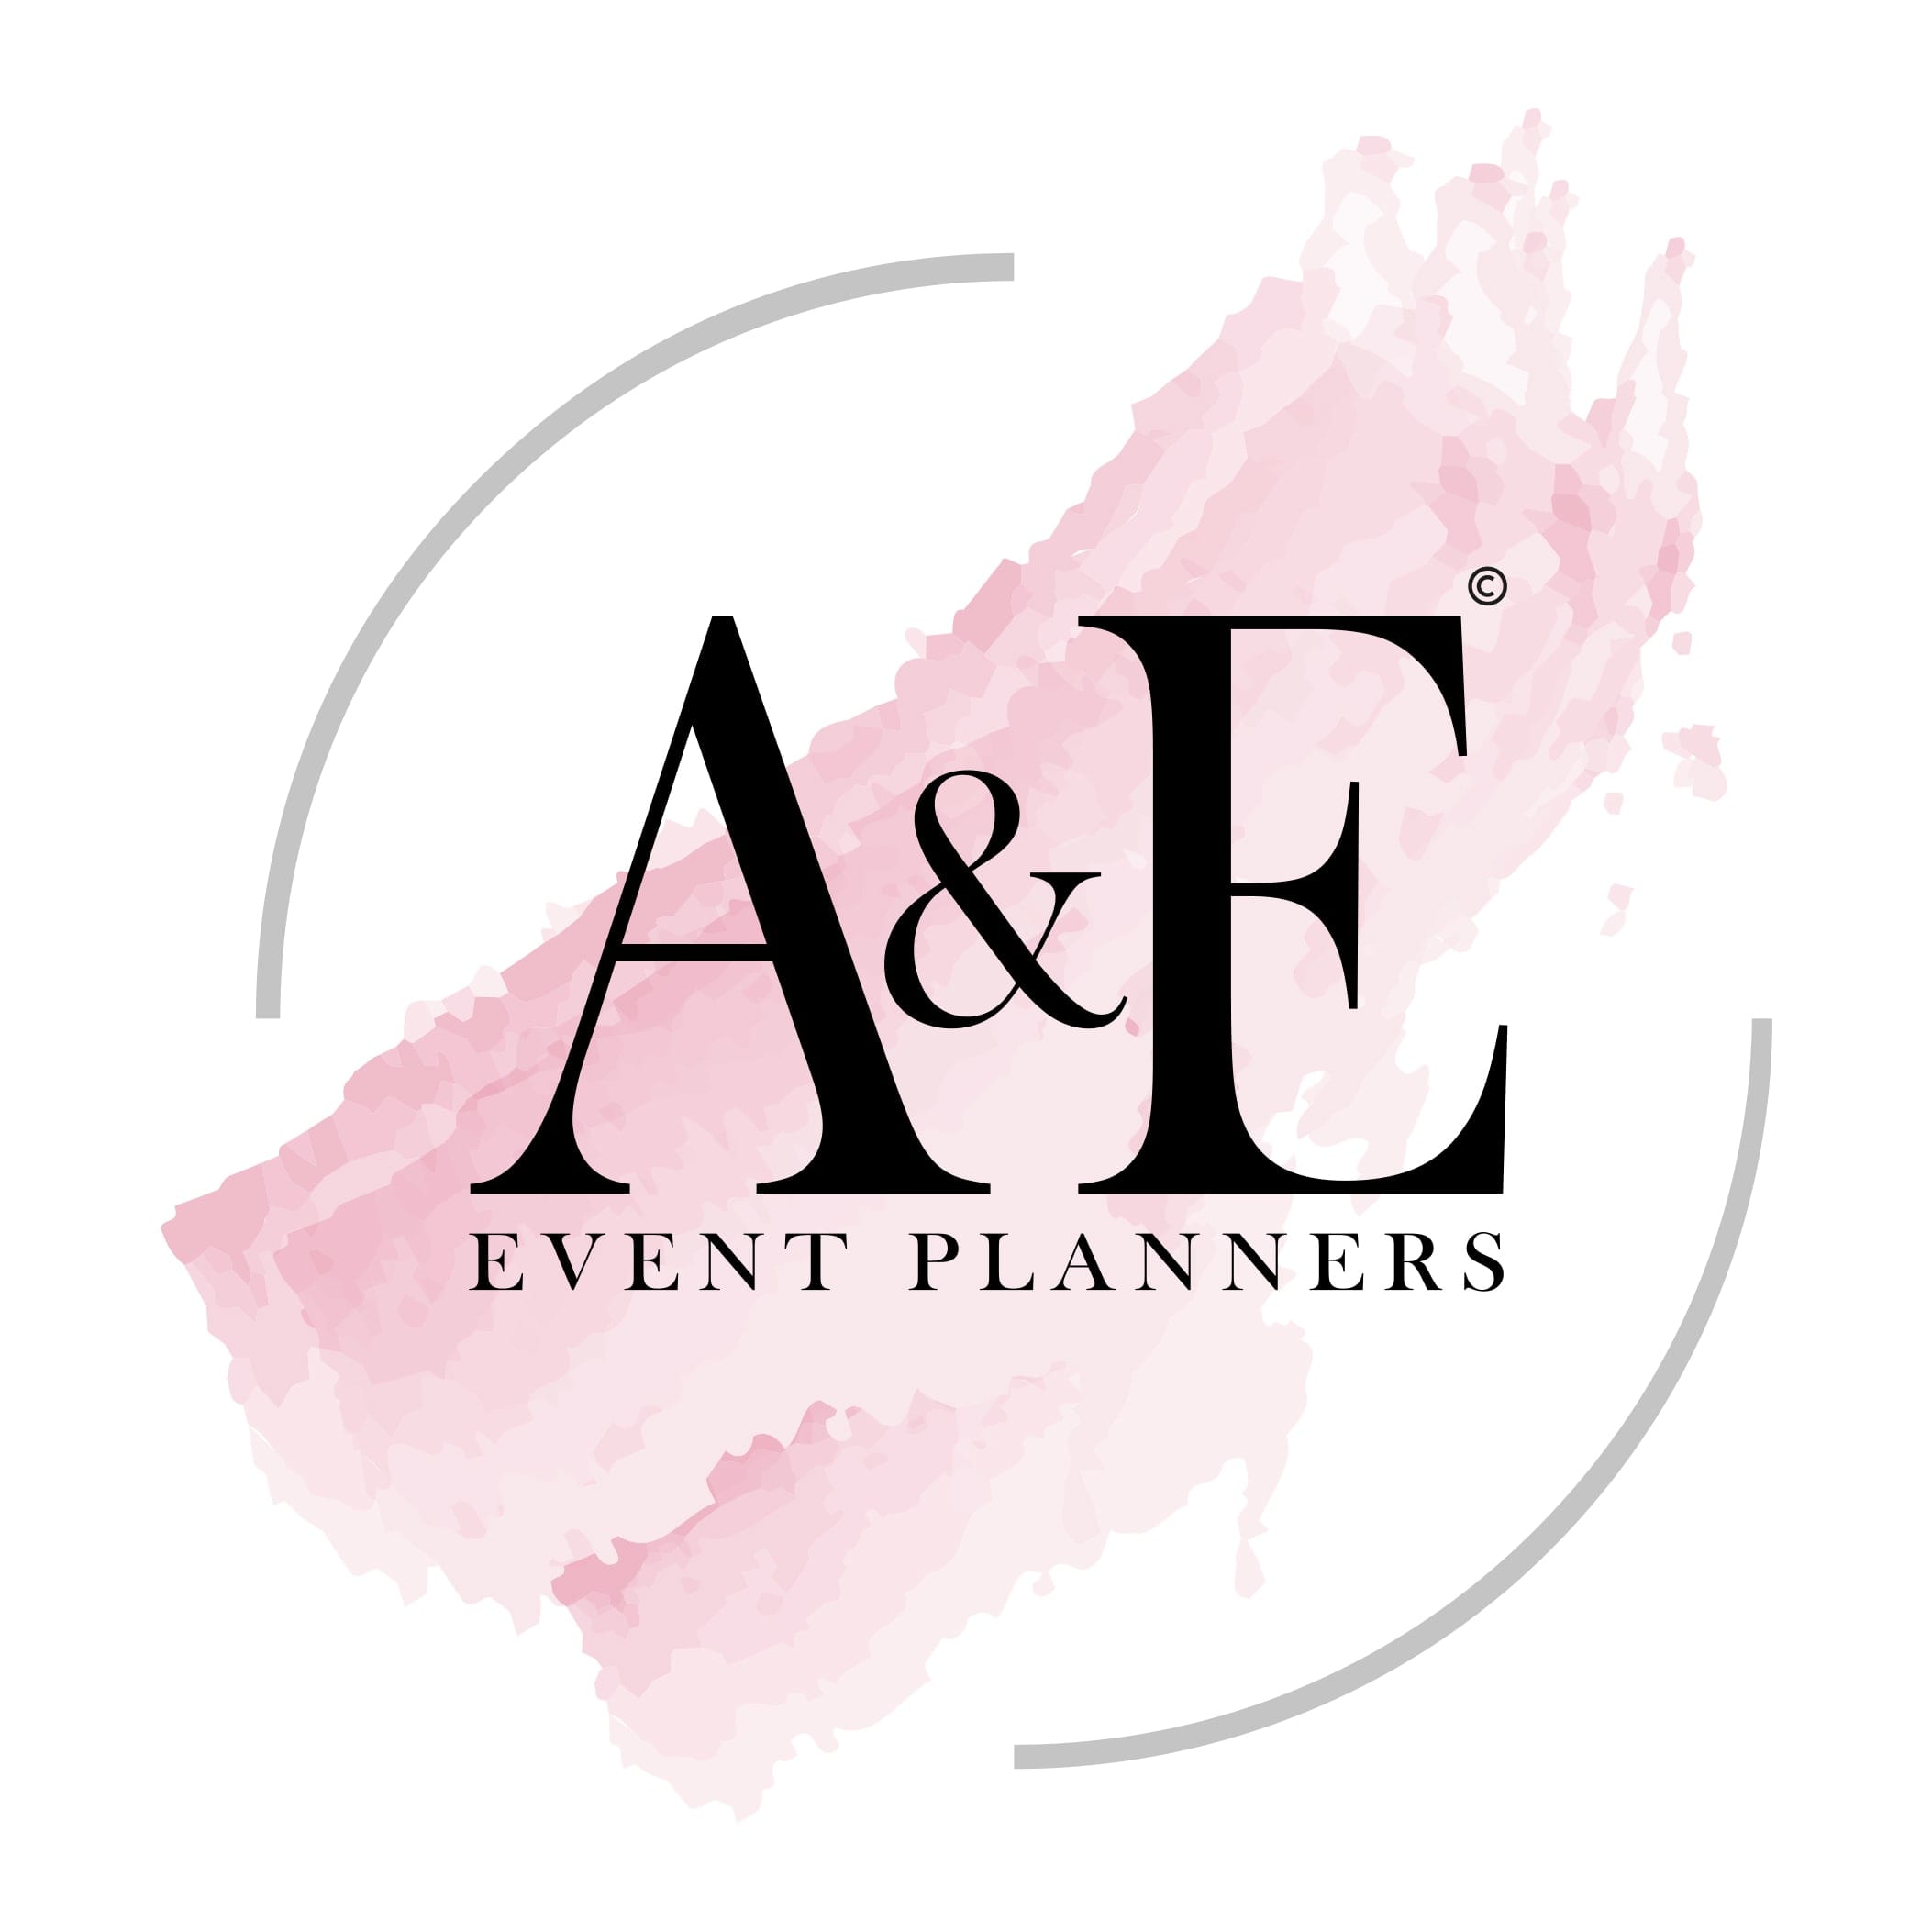 A & E Event Planners